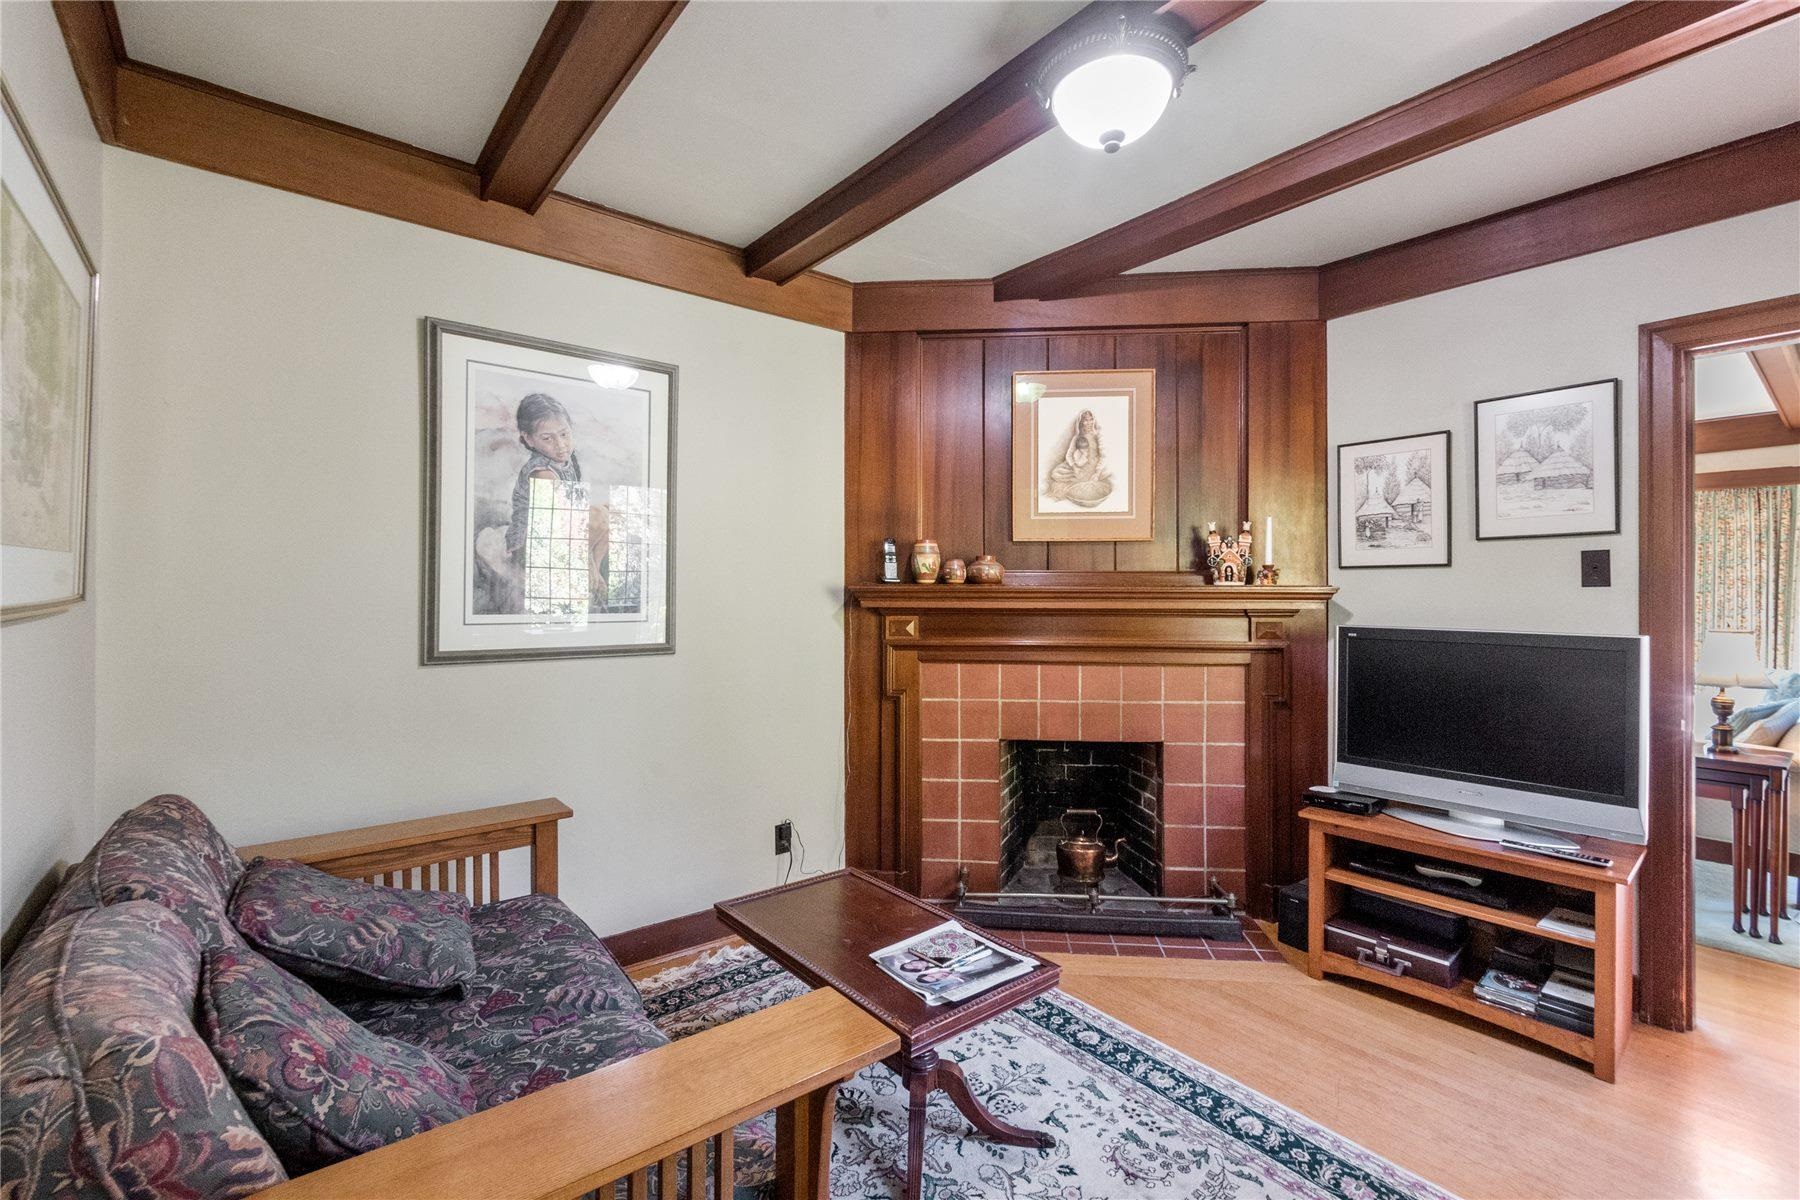 Listing image of 3870 LONSDALE AVENUE